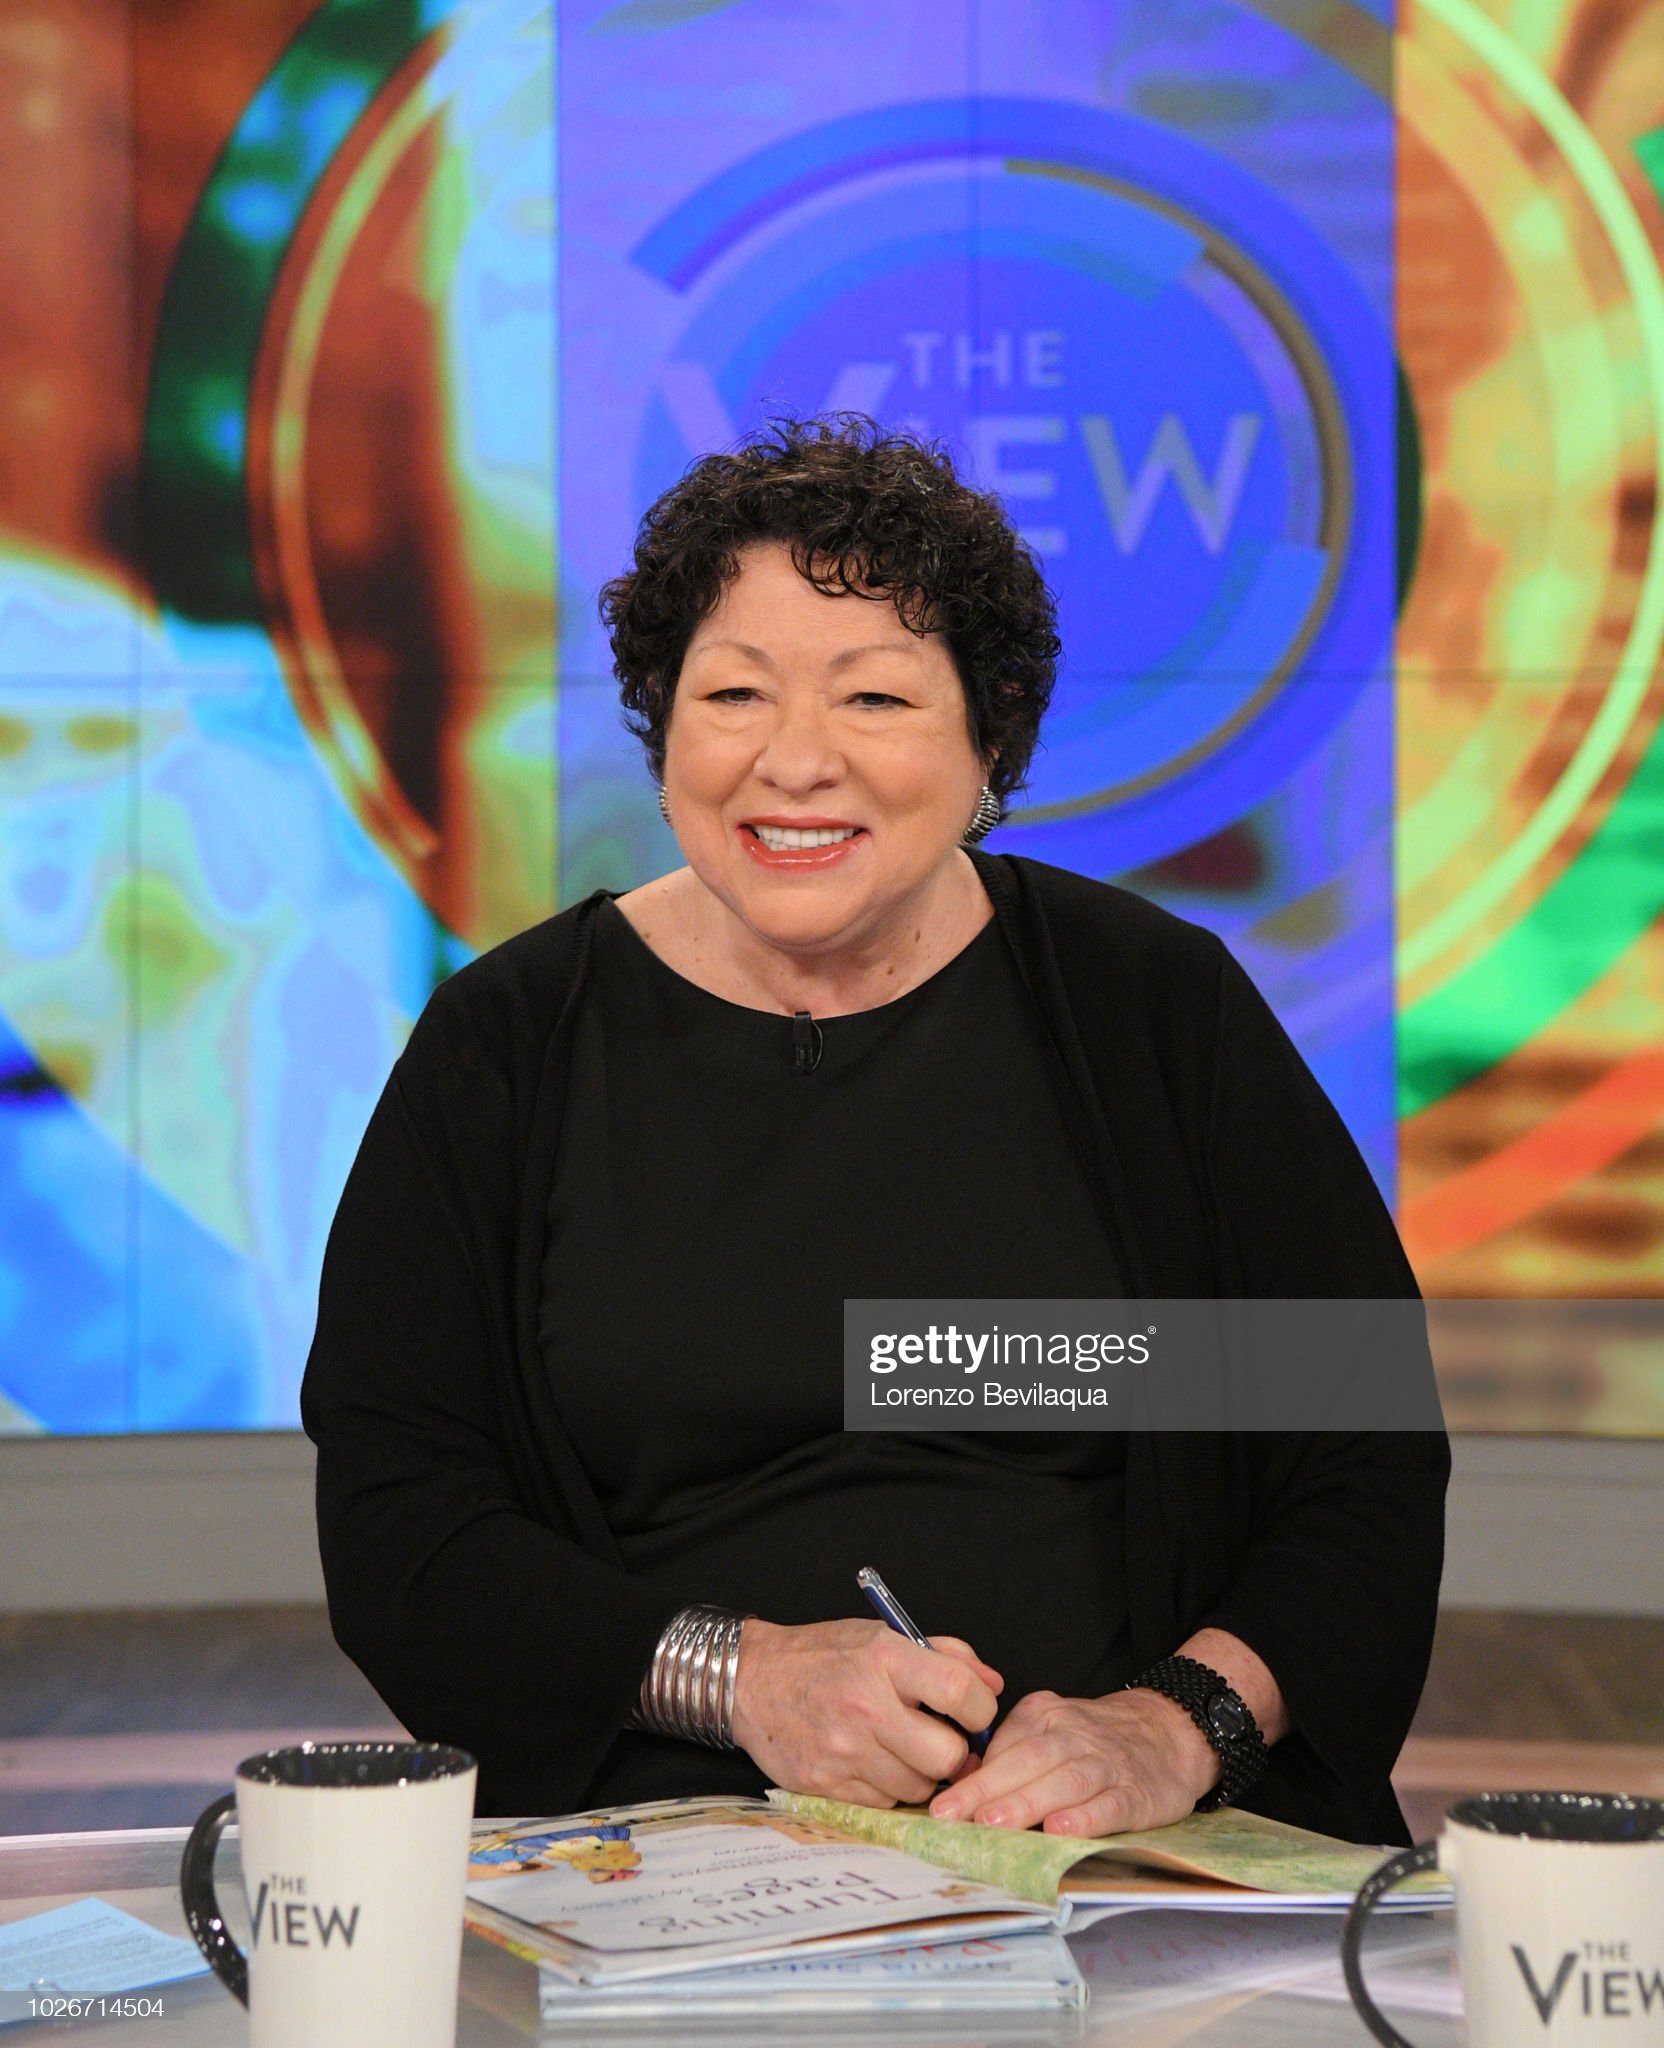 Is Marianna Sotomayor related to the Supreme Court justice? ABTC